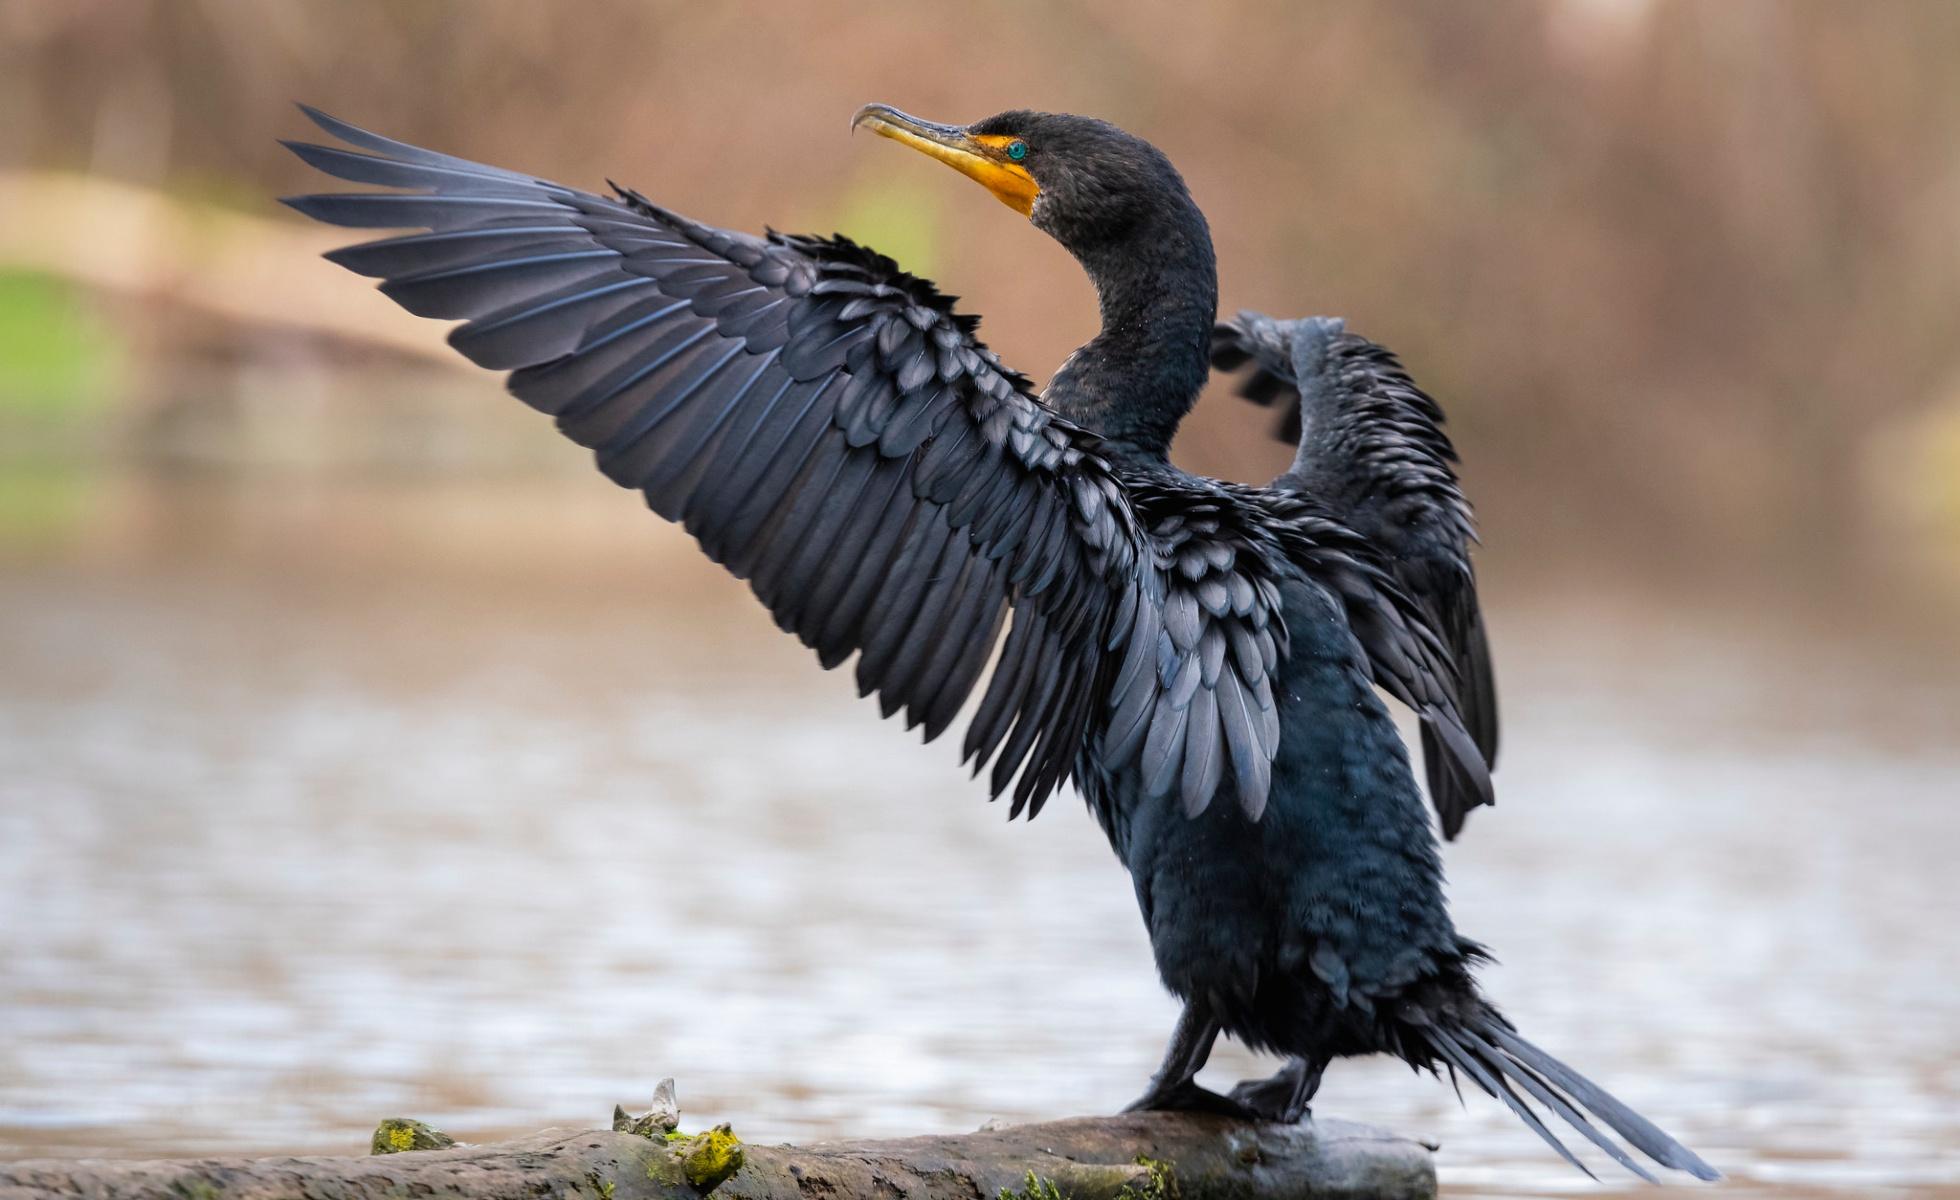 double-crested cormorants with wings open over body of water